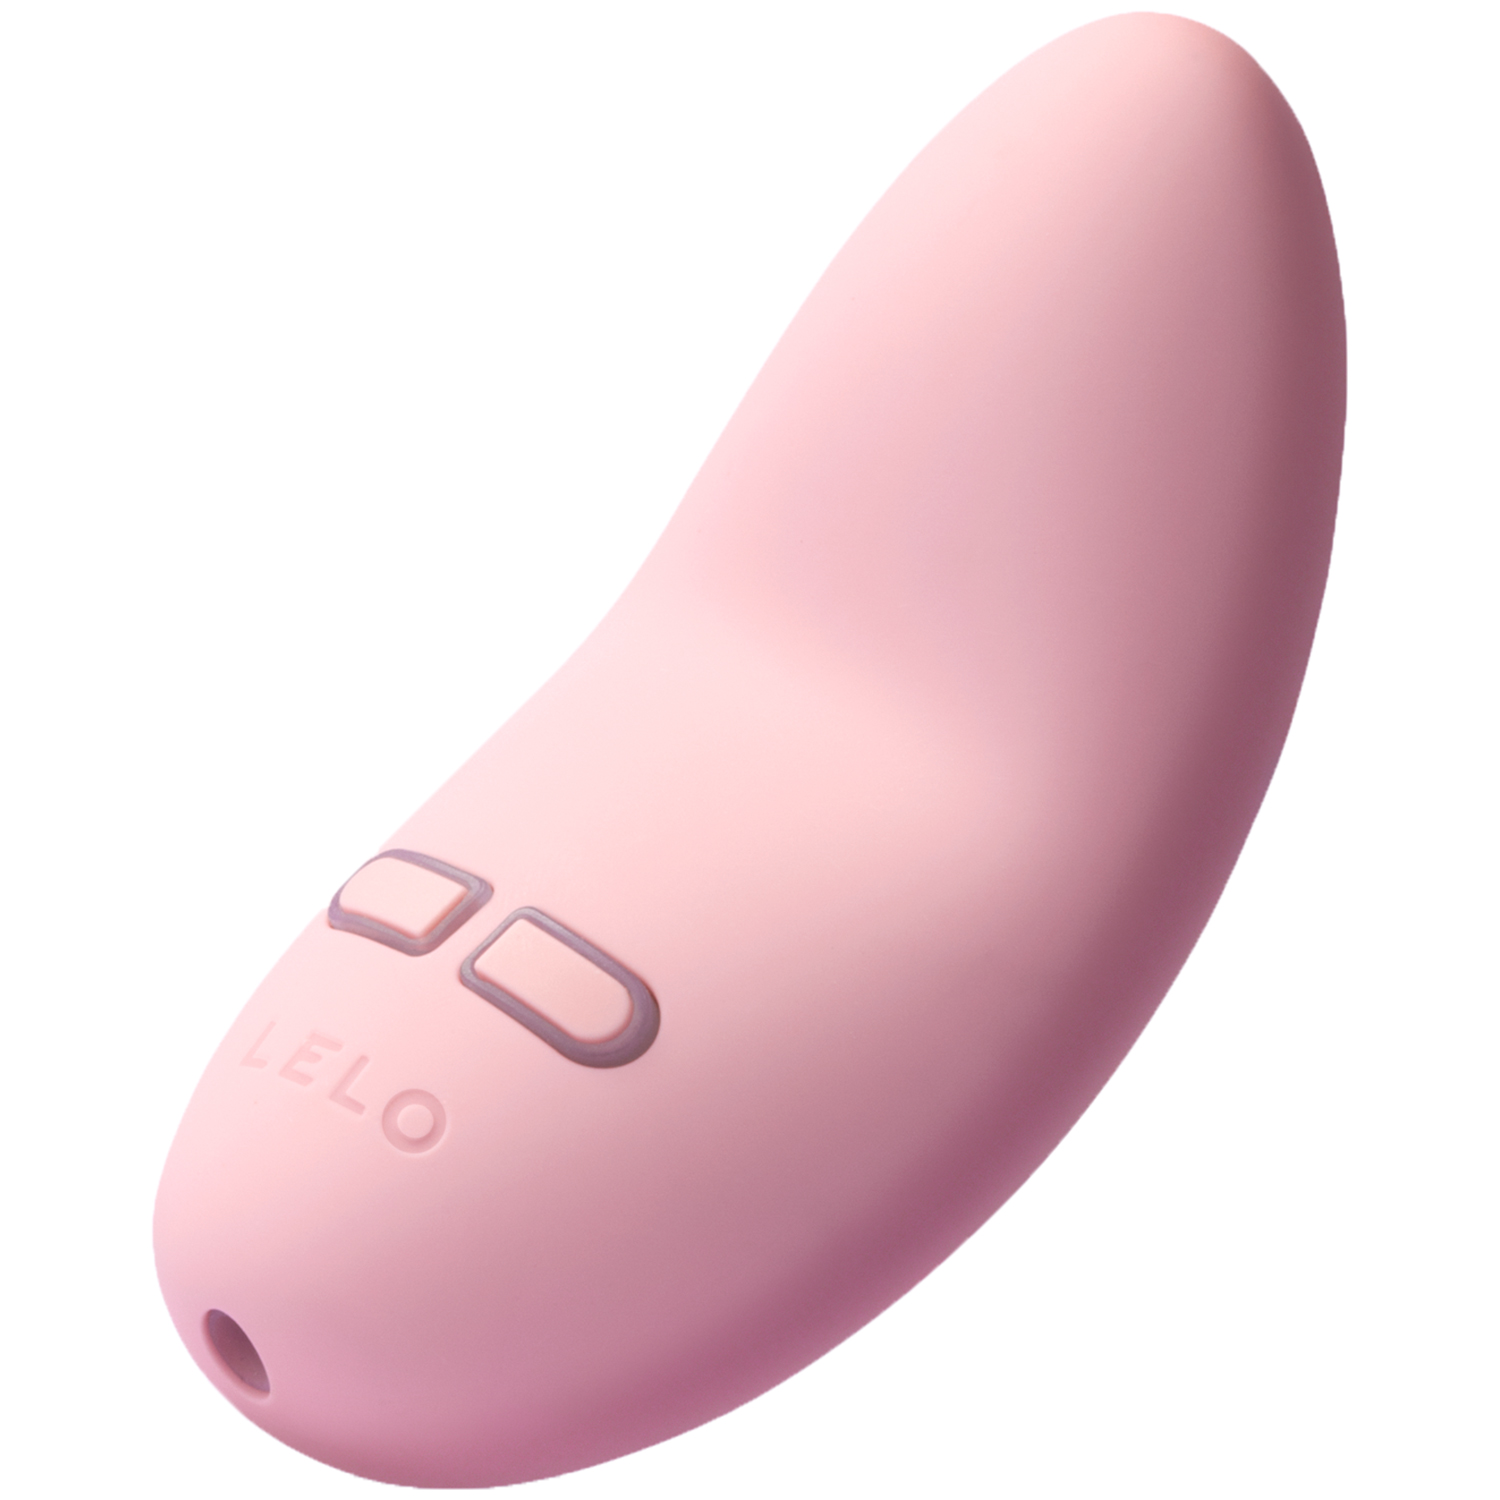 LELO LILY 2 Personal Massager - Pink